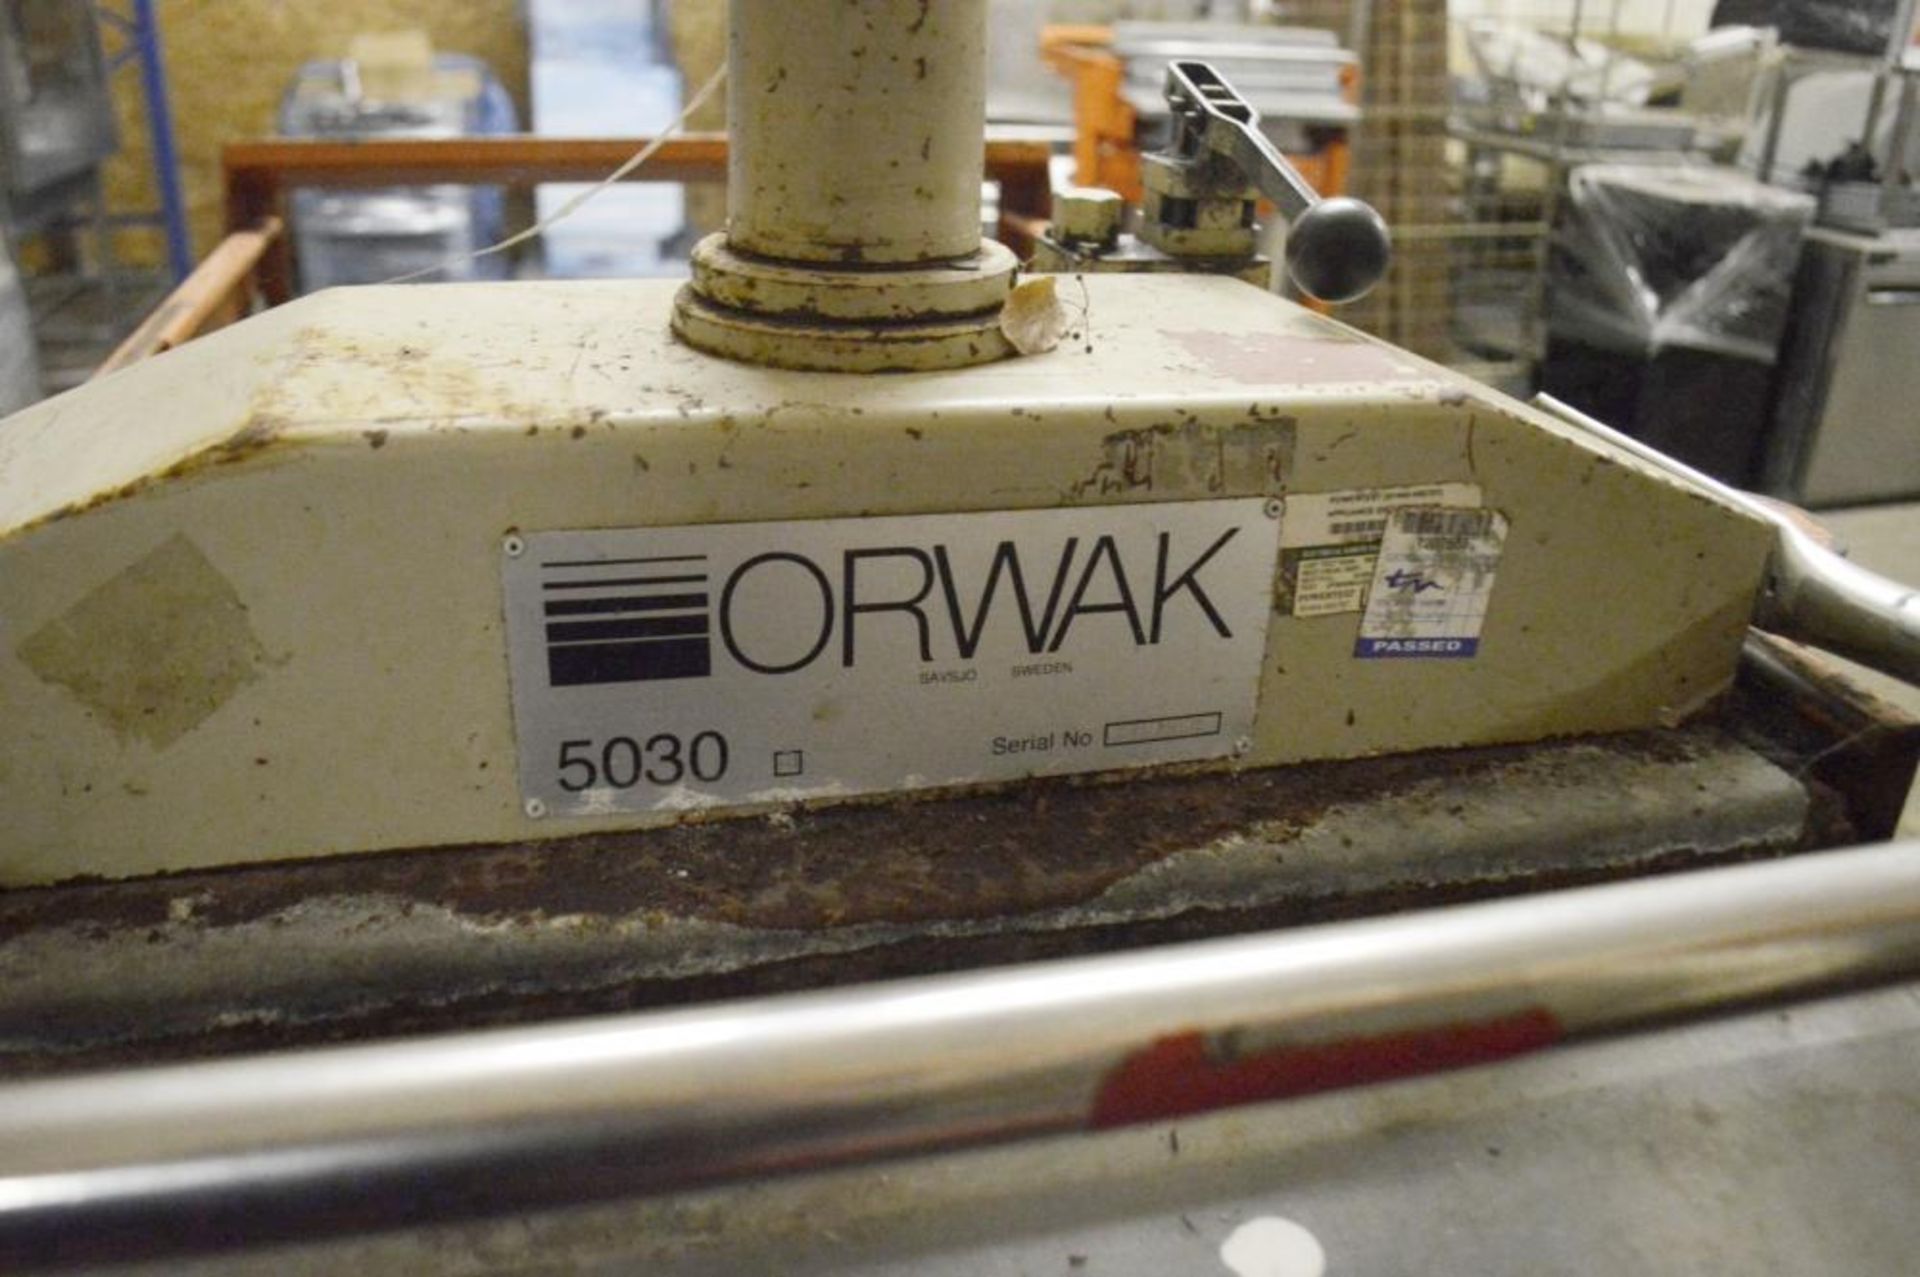 1 x Orwak 5030 Waste Compactor - Used For Compacting Recyclable or Non-Recyclable Waste - Red - Image 5 of 6